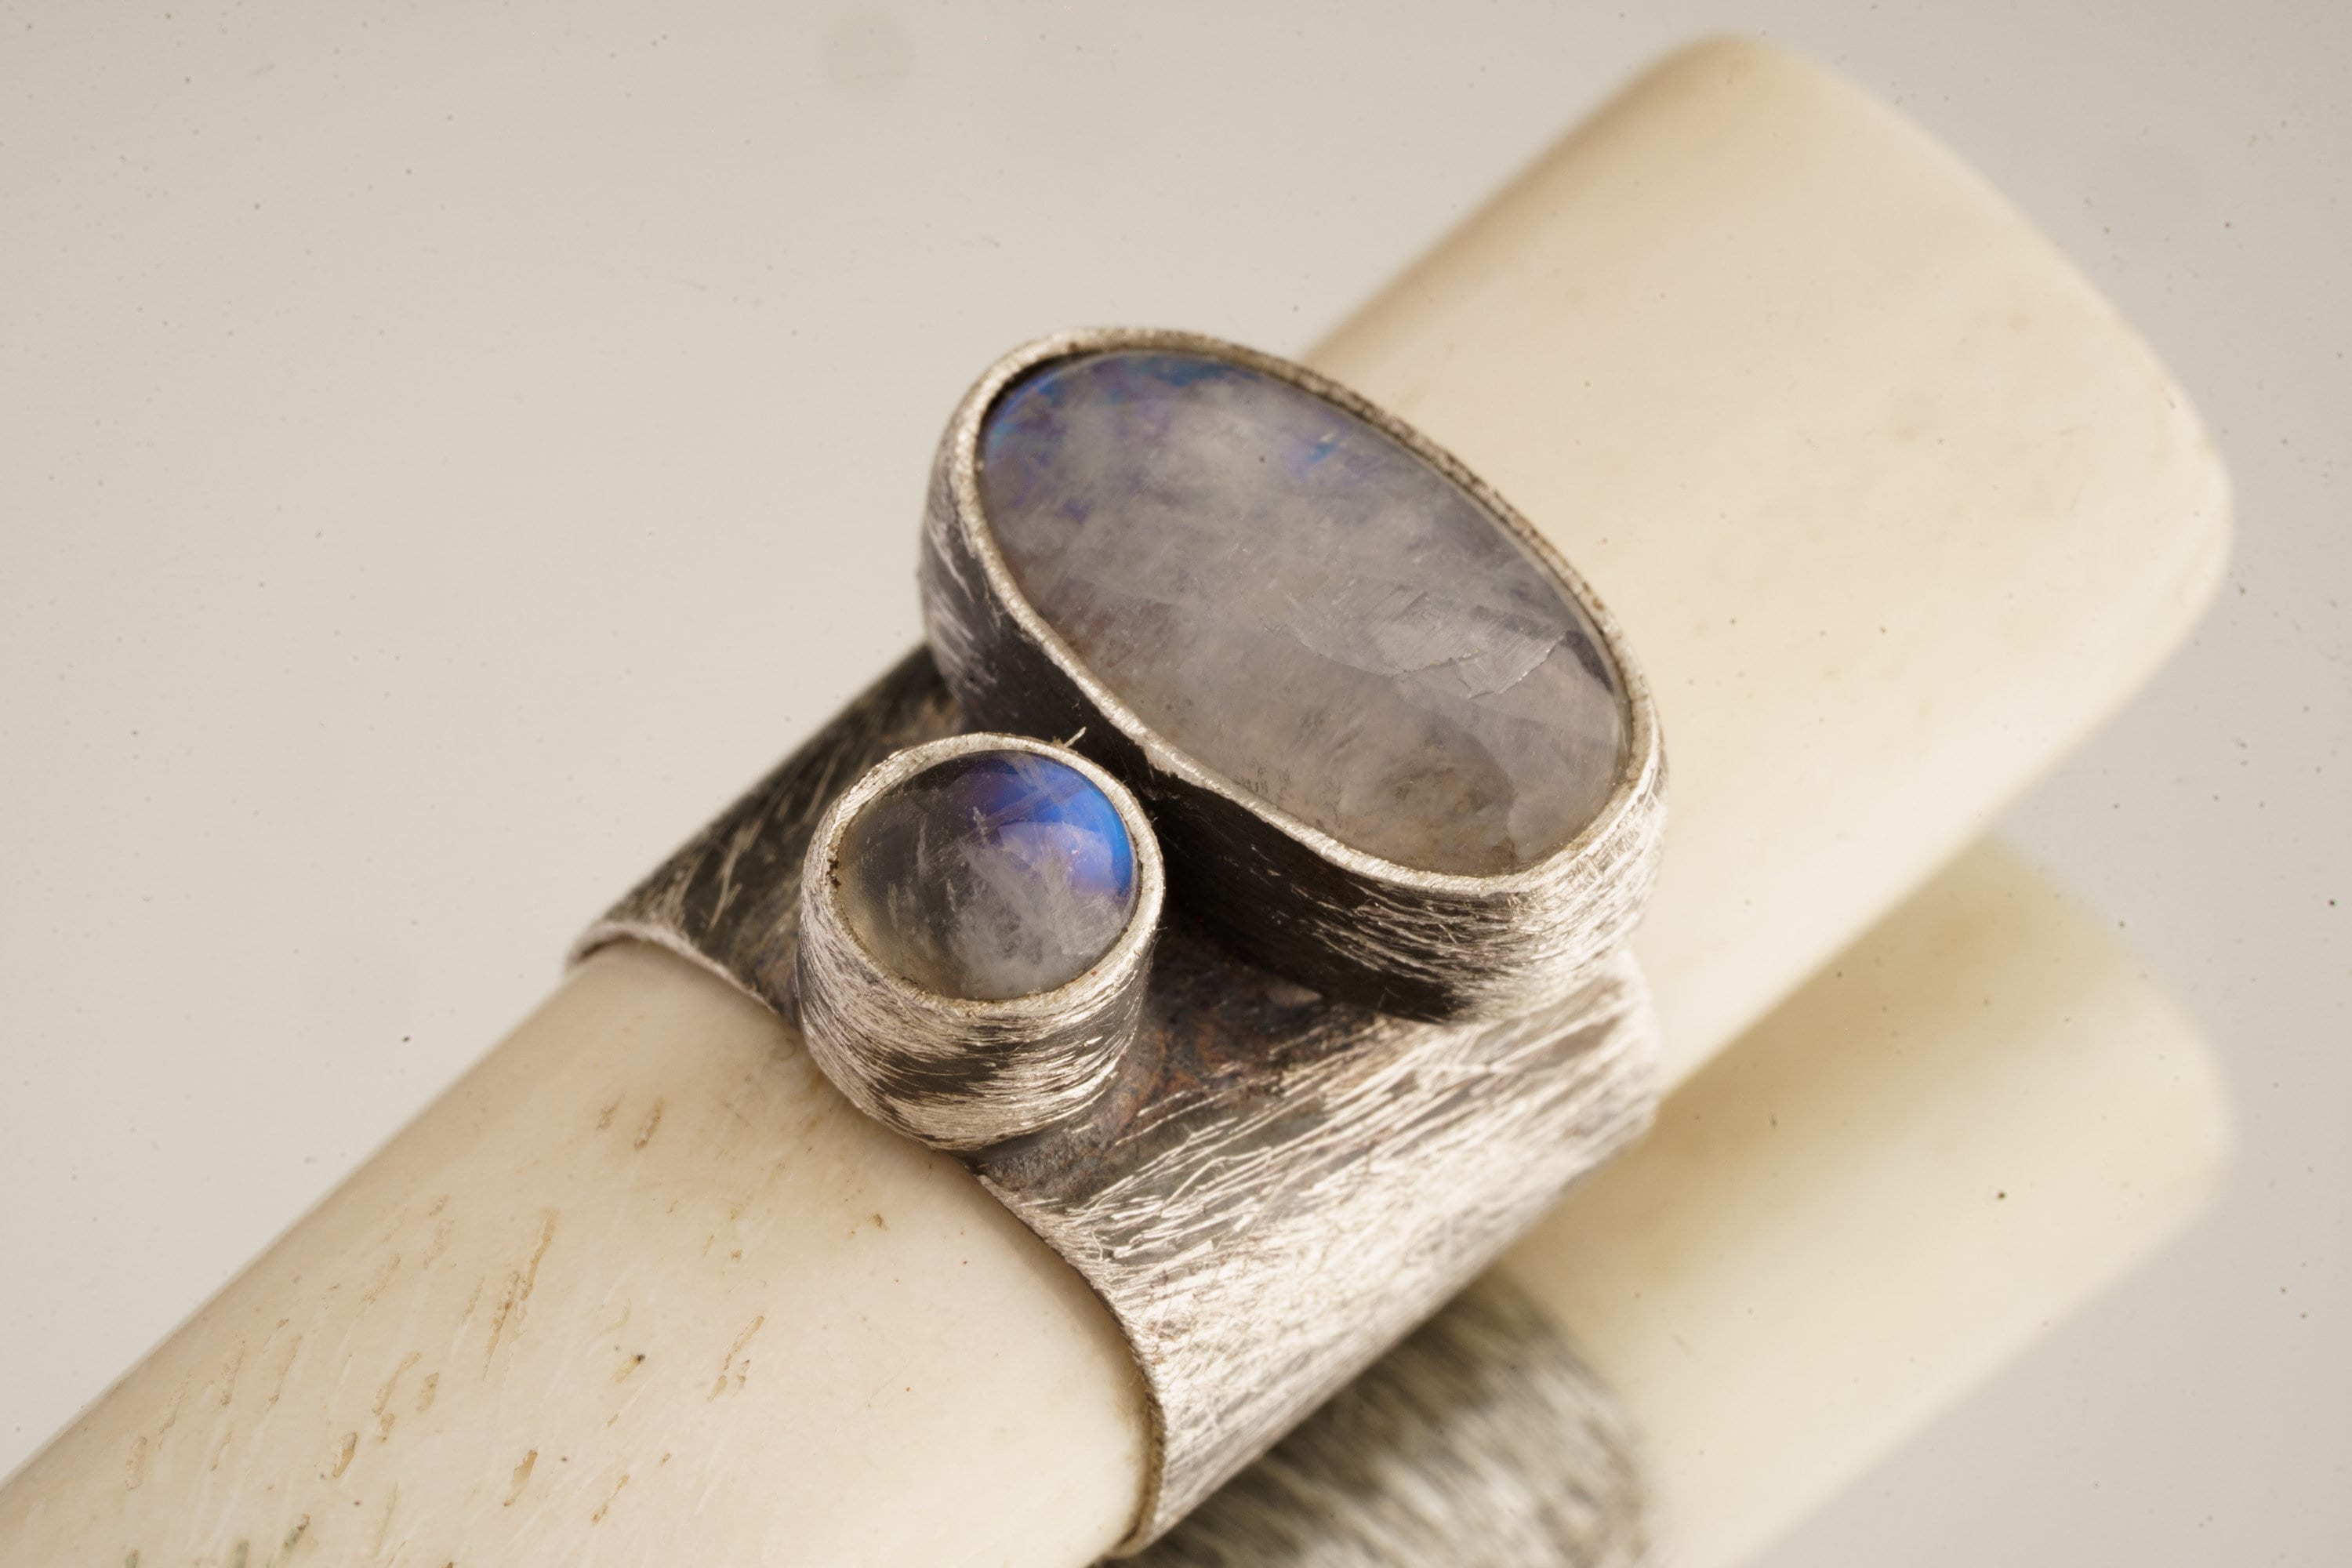 Celestial Whisper: One Oval and One Circular Blue Moonstone - Antique Bone Inhalation Tube